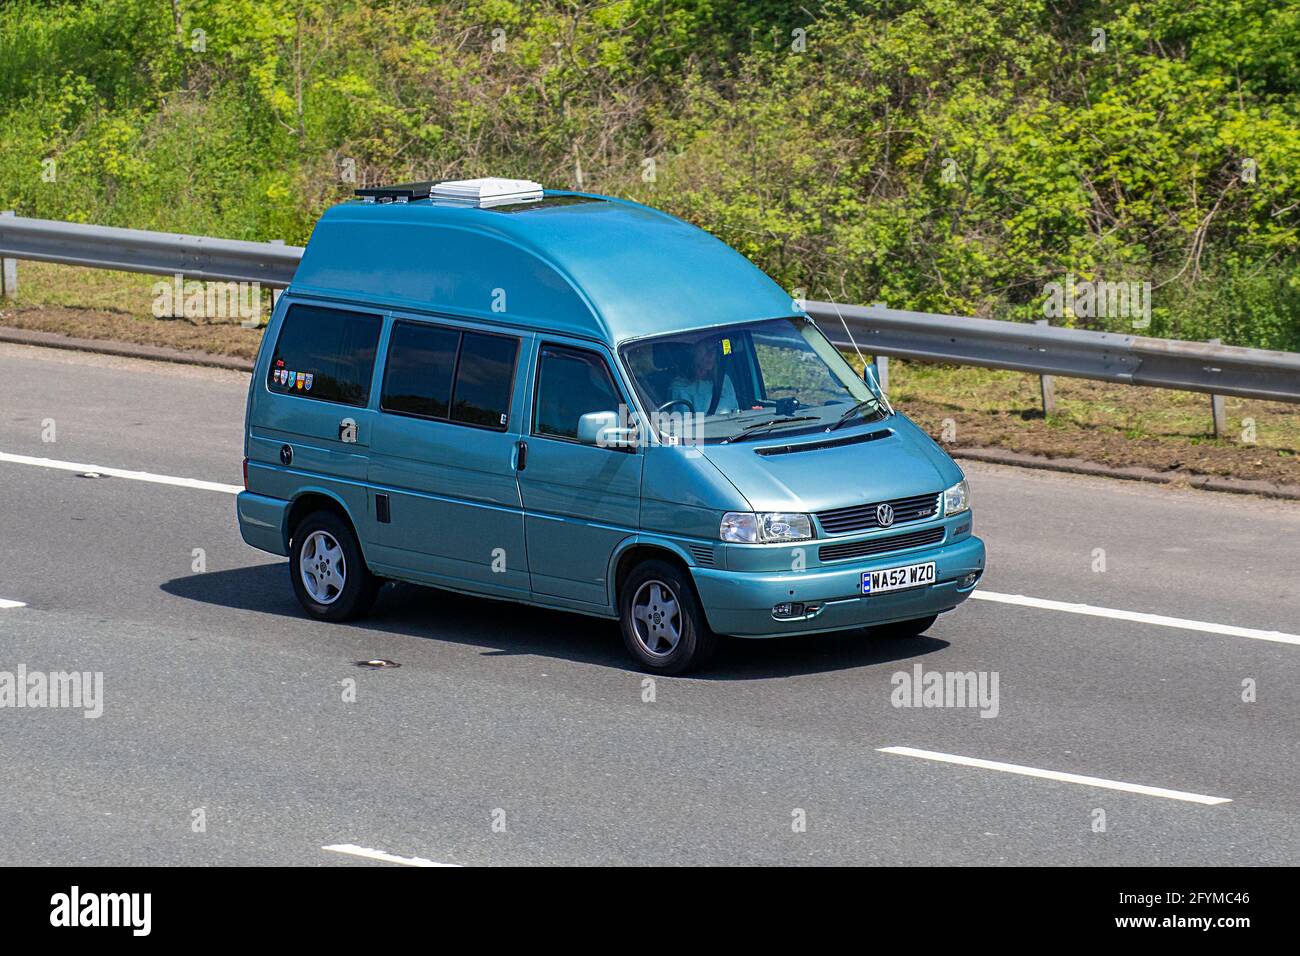 2002 blue VW Volkswagen Transporter Tdi Auto Lwb; Caravans and Motorhomes, campervans on Britain's roads, RV leisure vehicle, family holidays, caravanette vacations, Touring caravan holiday, van conversions, Vanagon autohome, life on the road,  auto-sleeper Stock Photo